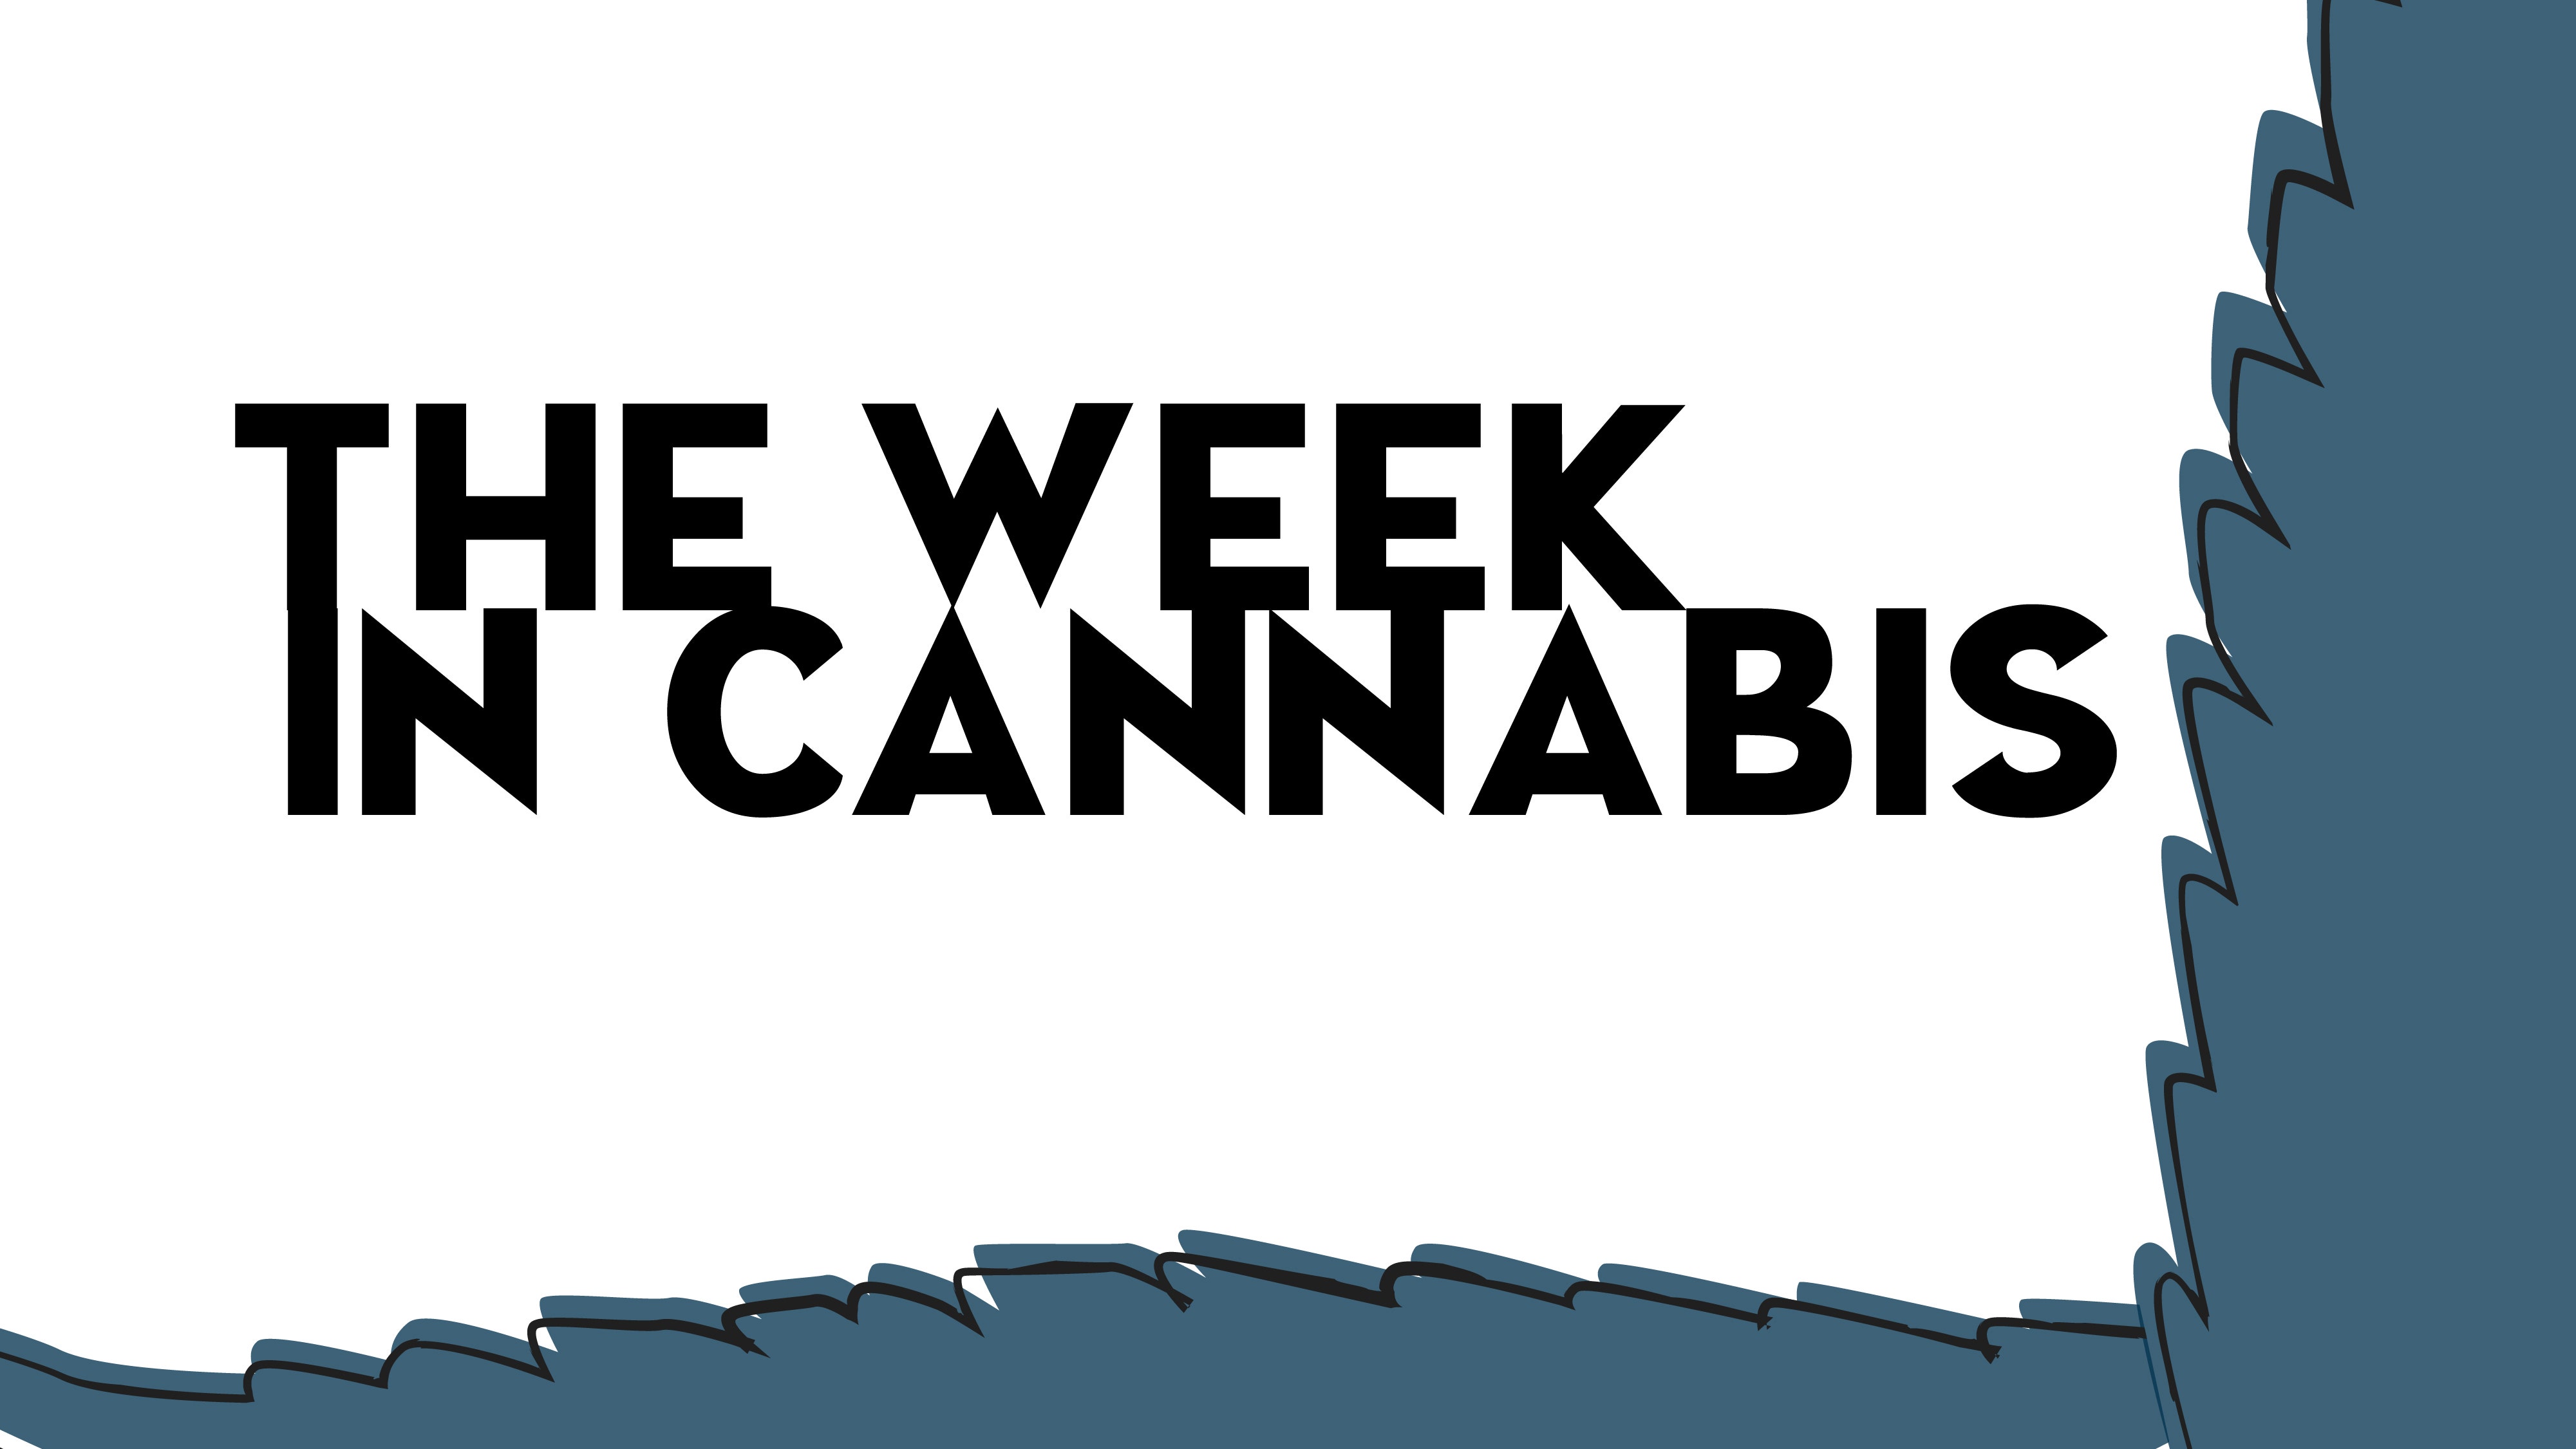 The Week In Cannabis: Aurora And Canopy's Bad News, Charitable Initiatives During A Pandemic, And Big Capital Raises